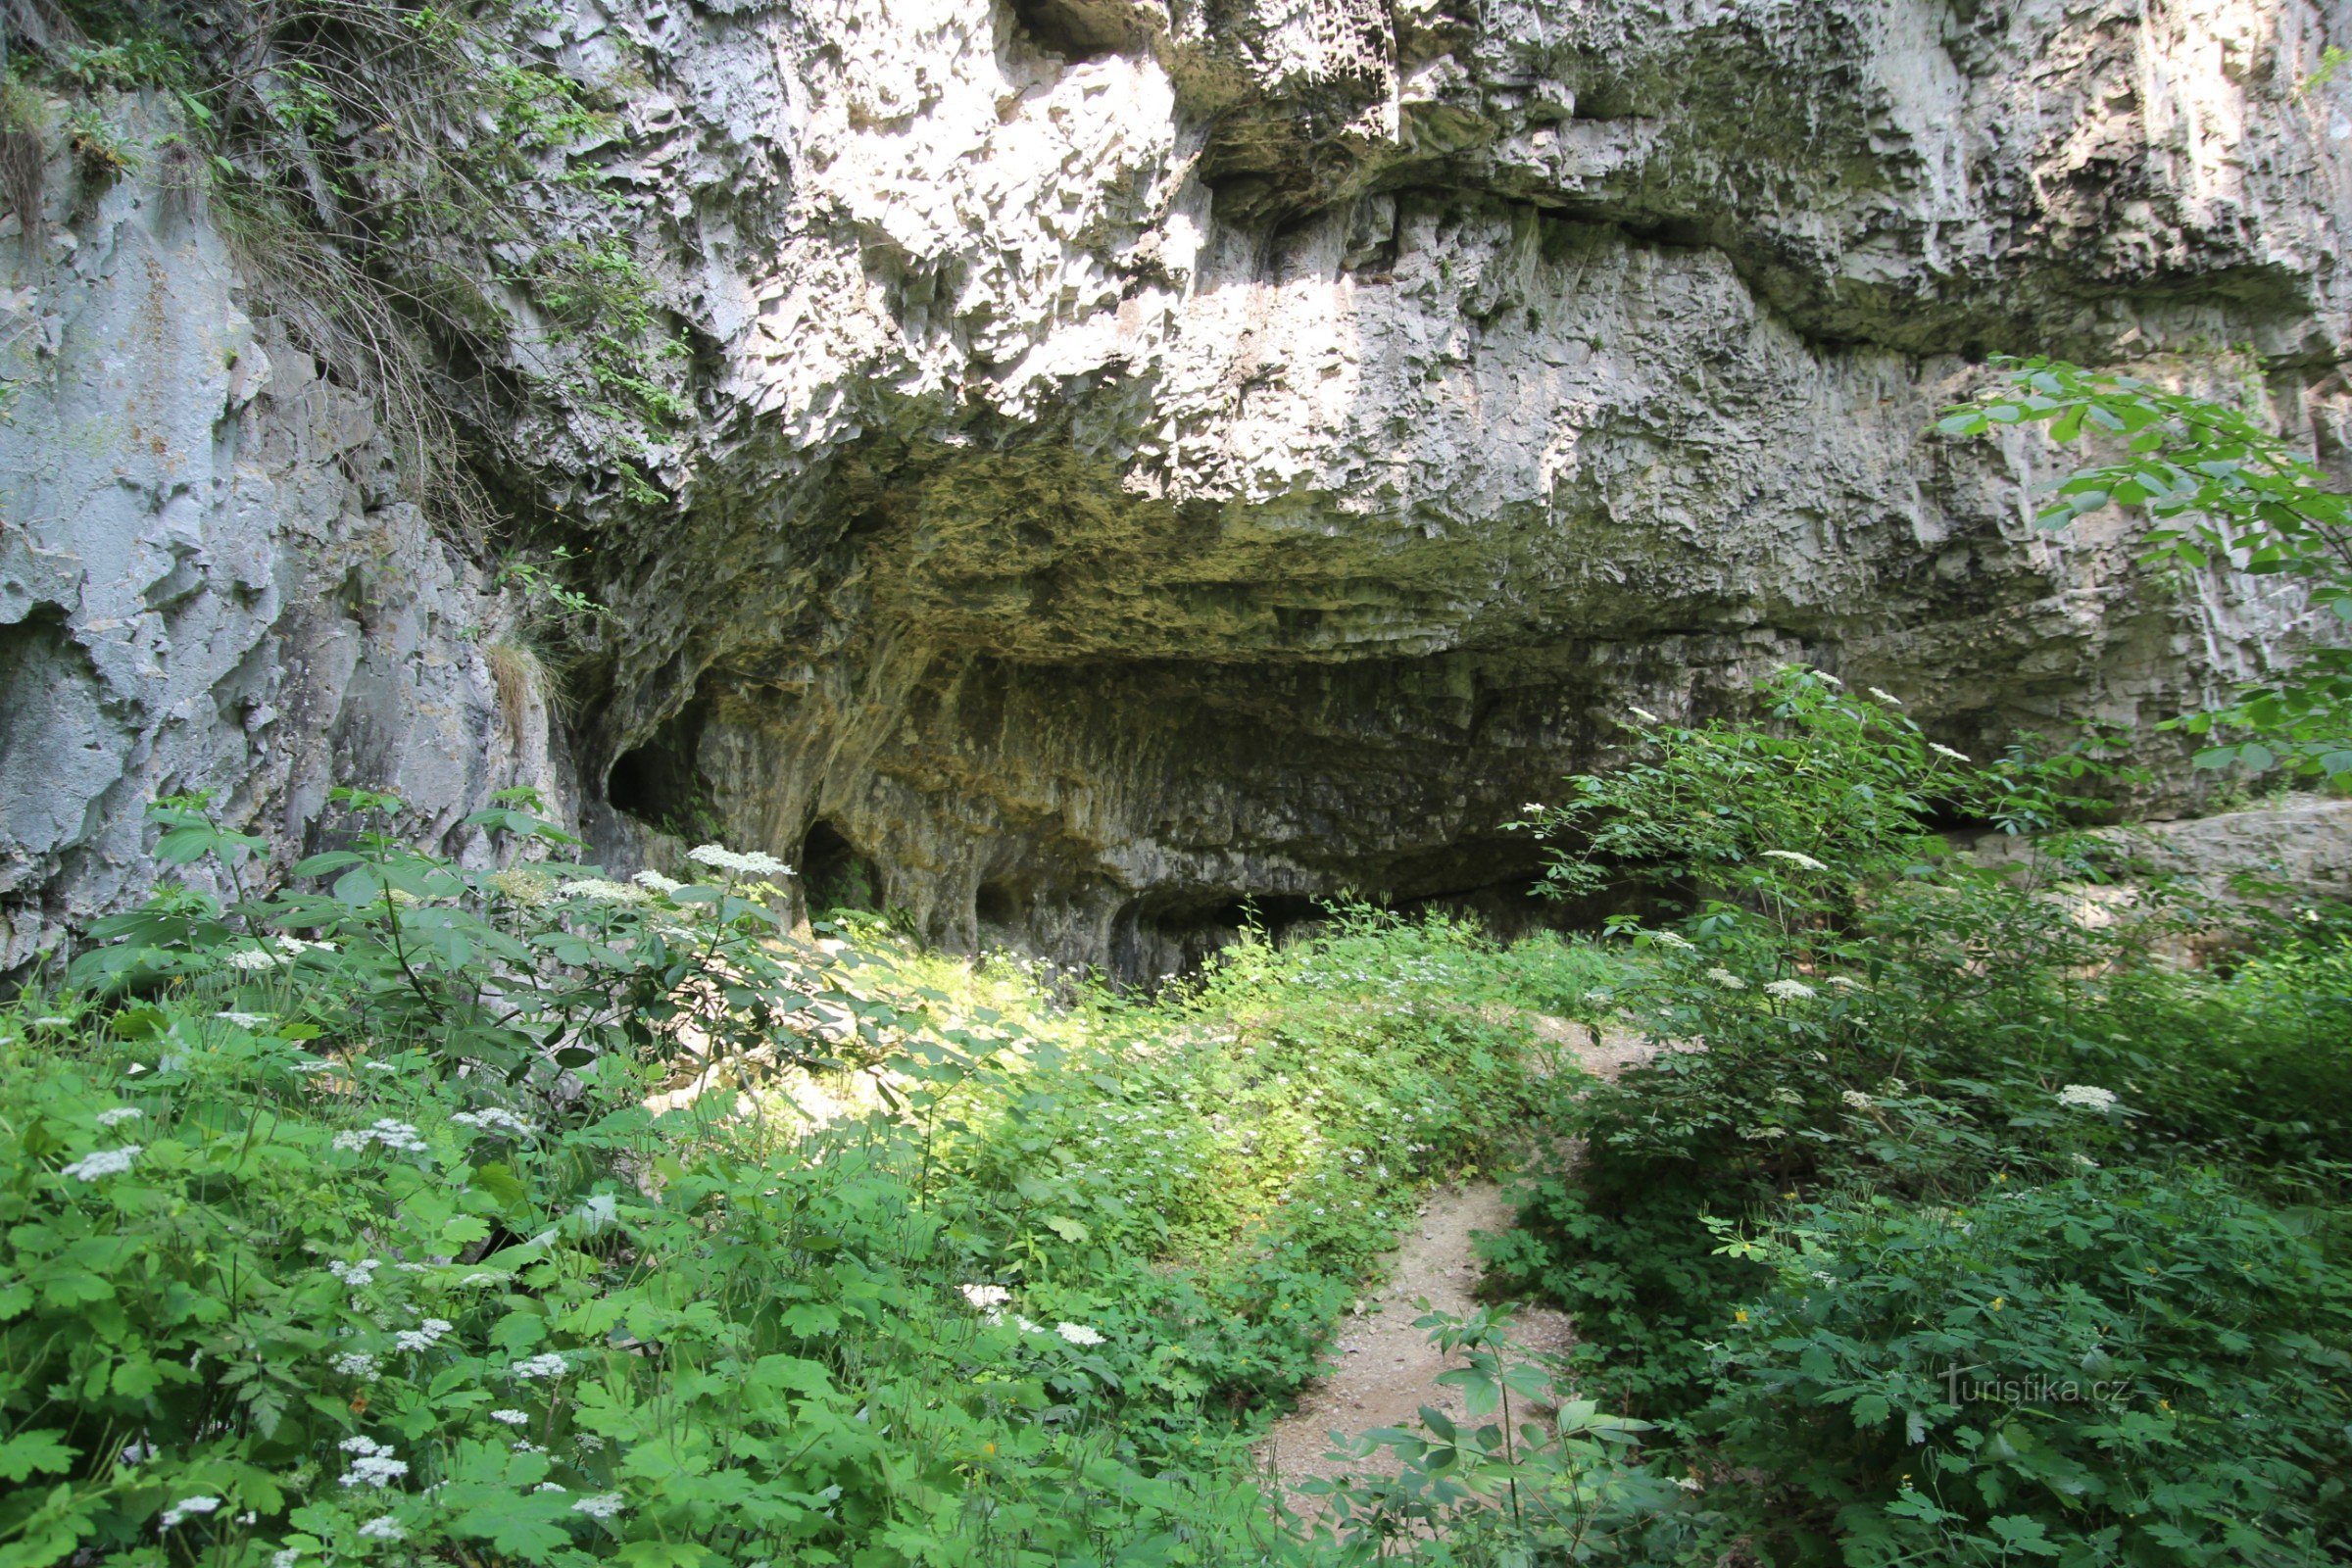 Rock overhang above the cave entrance